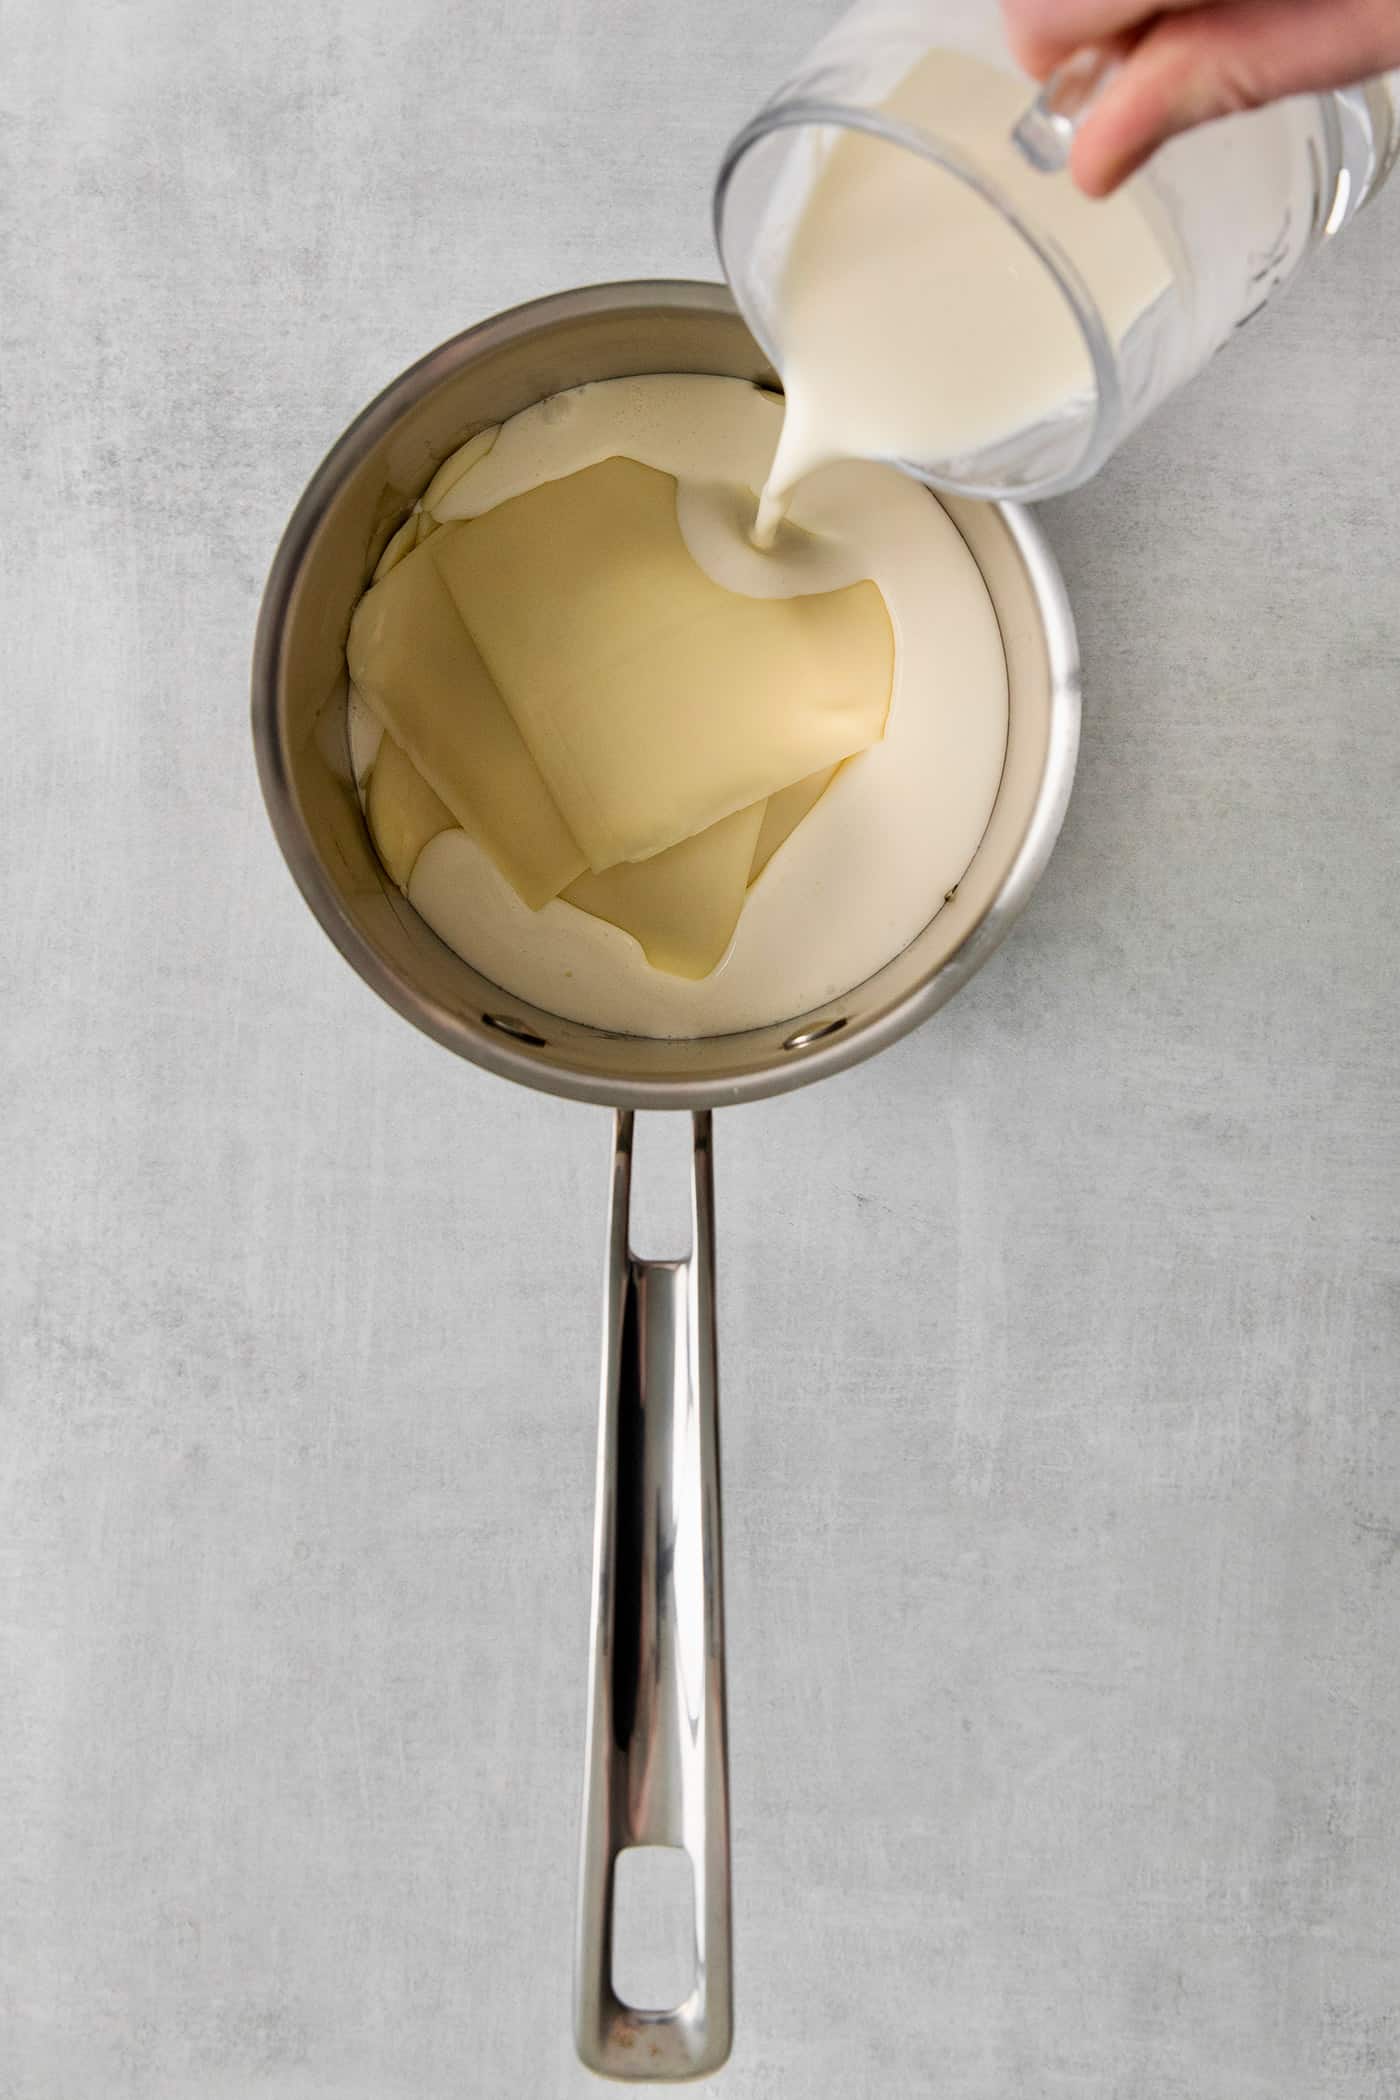 Heavy cream being poured over slices of American cheese in a saucepan